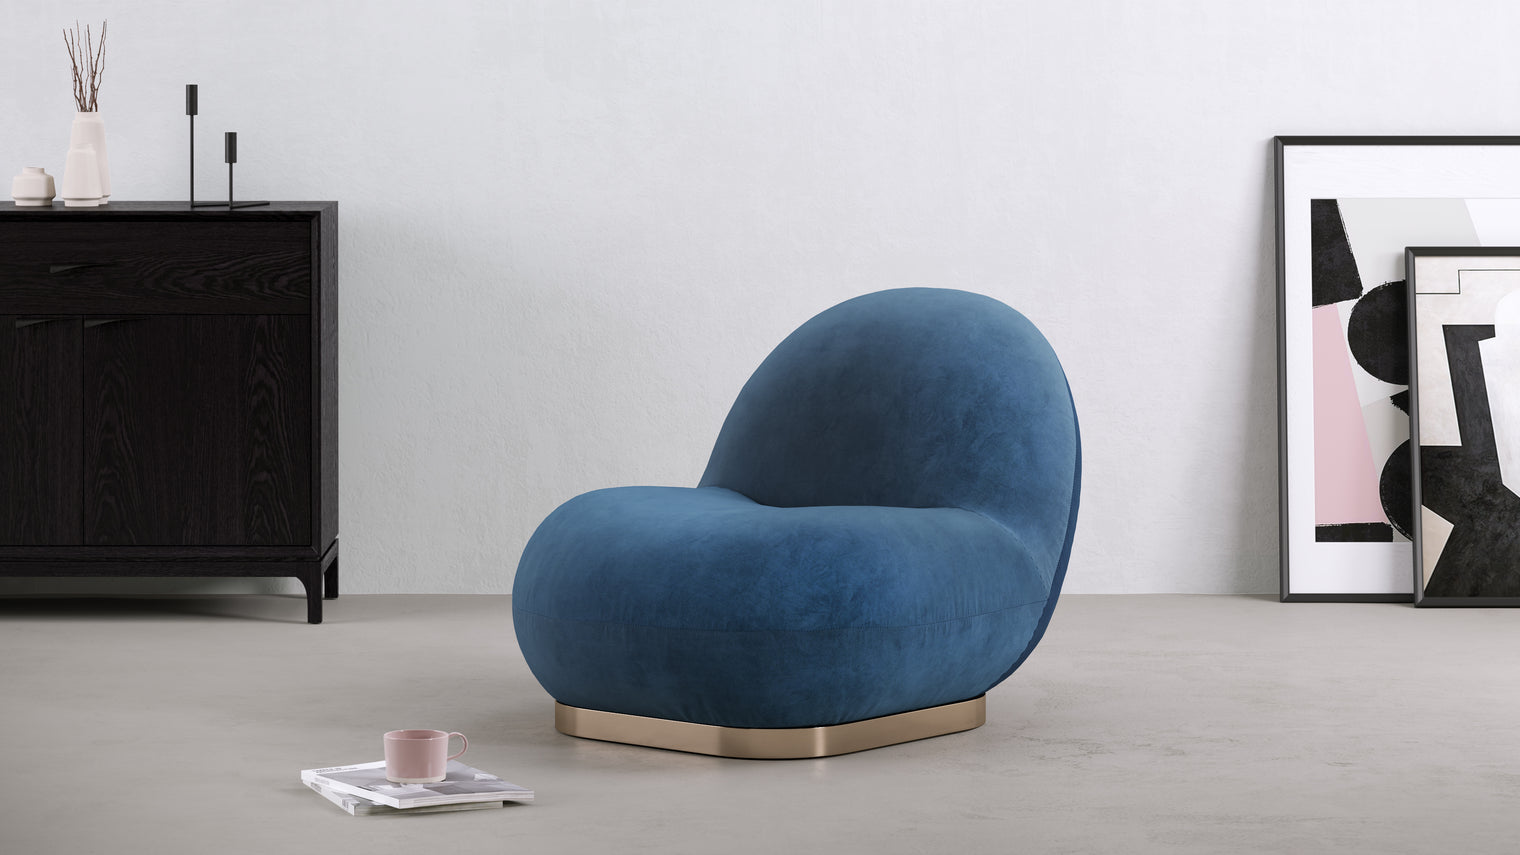 Sitting in the Clouds|Like sitting on clouds, the Paulin chair combines organic shapes and an ergonomic design to provide a relaxed yet modern silhouette.
